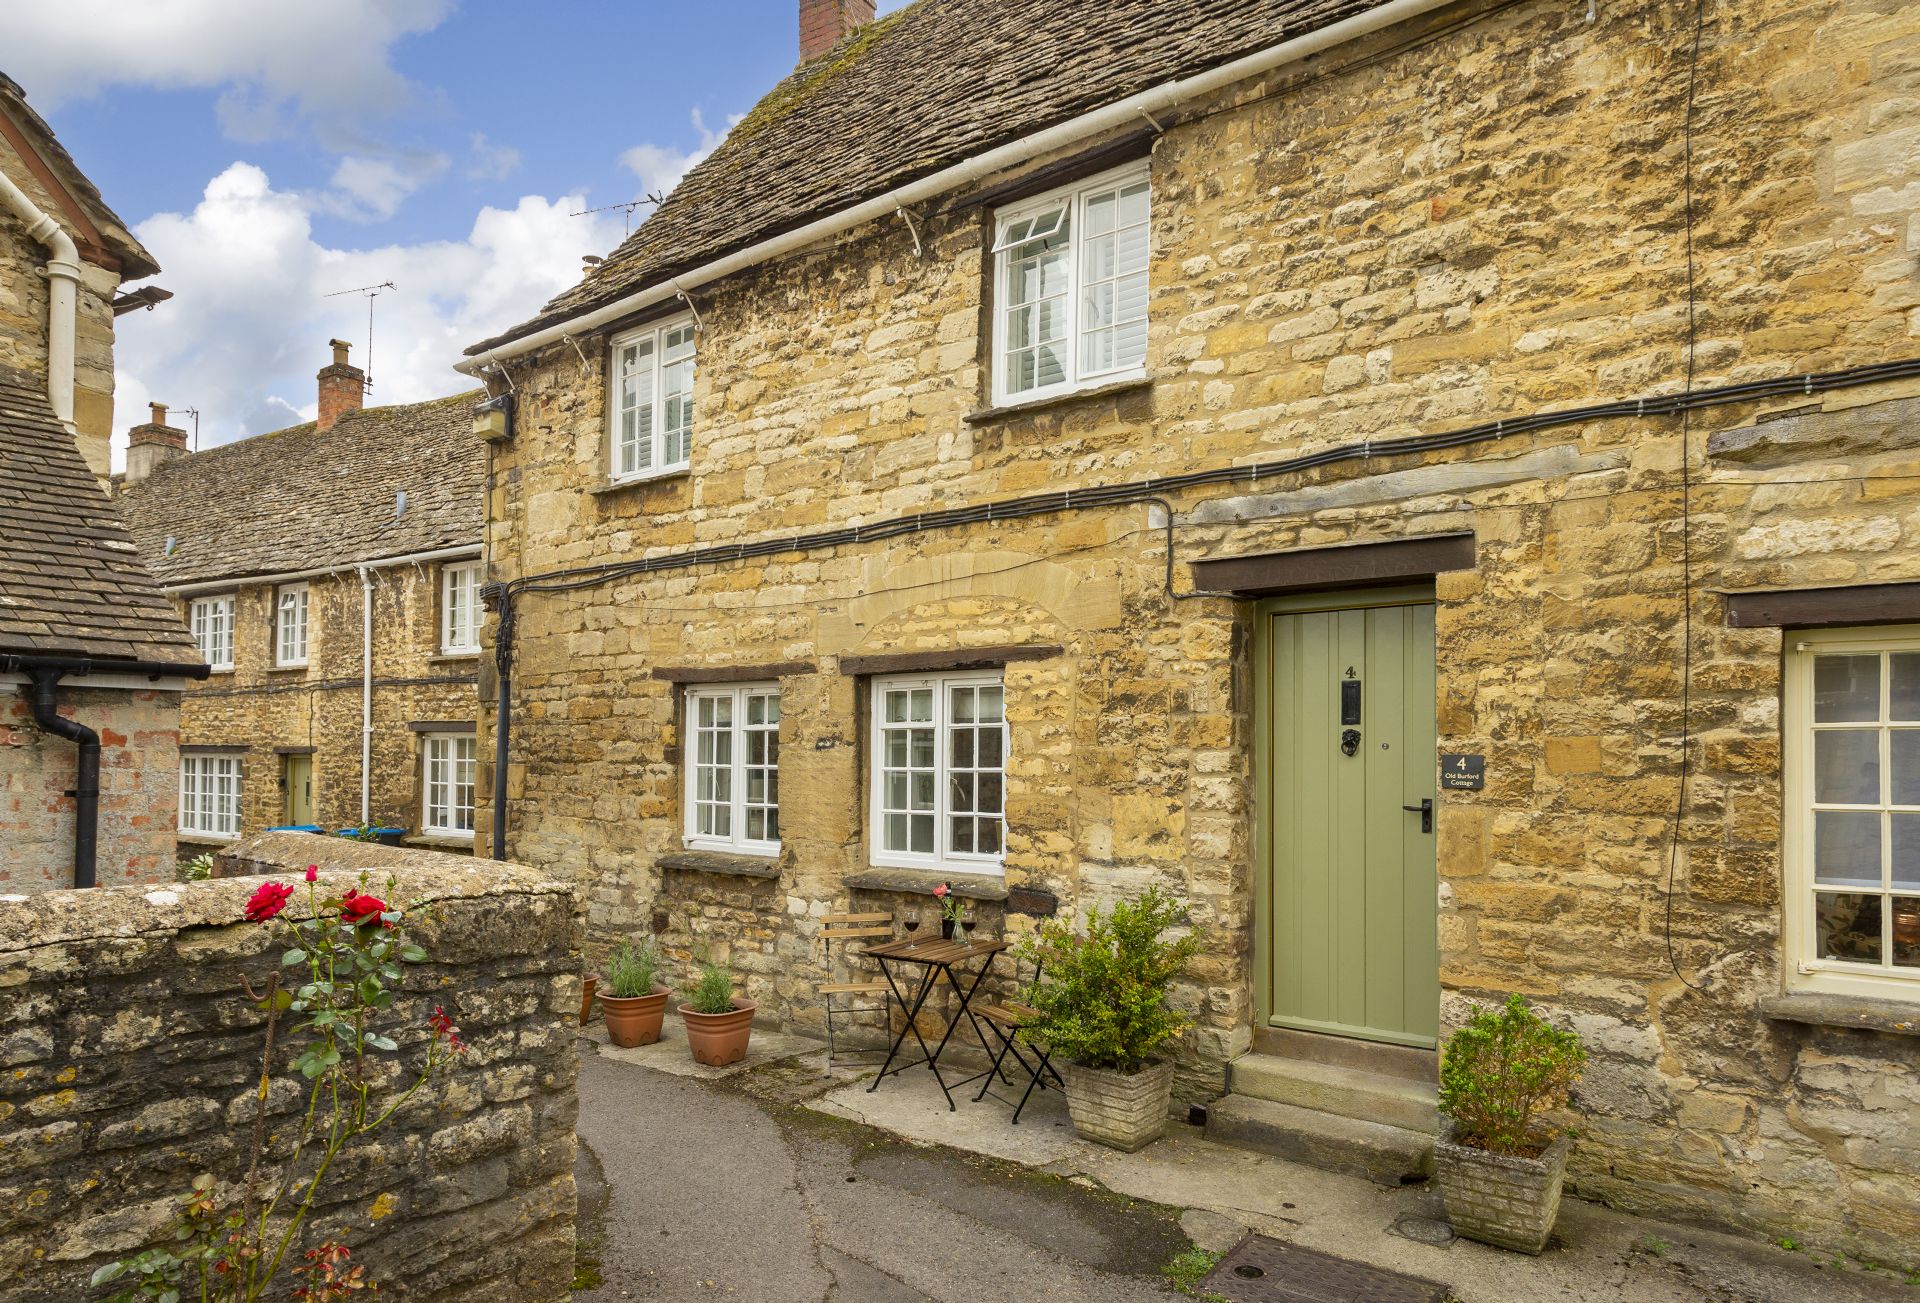 Details about a cottage Holiday at Old Burford Cottage